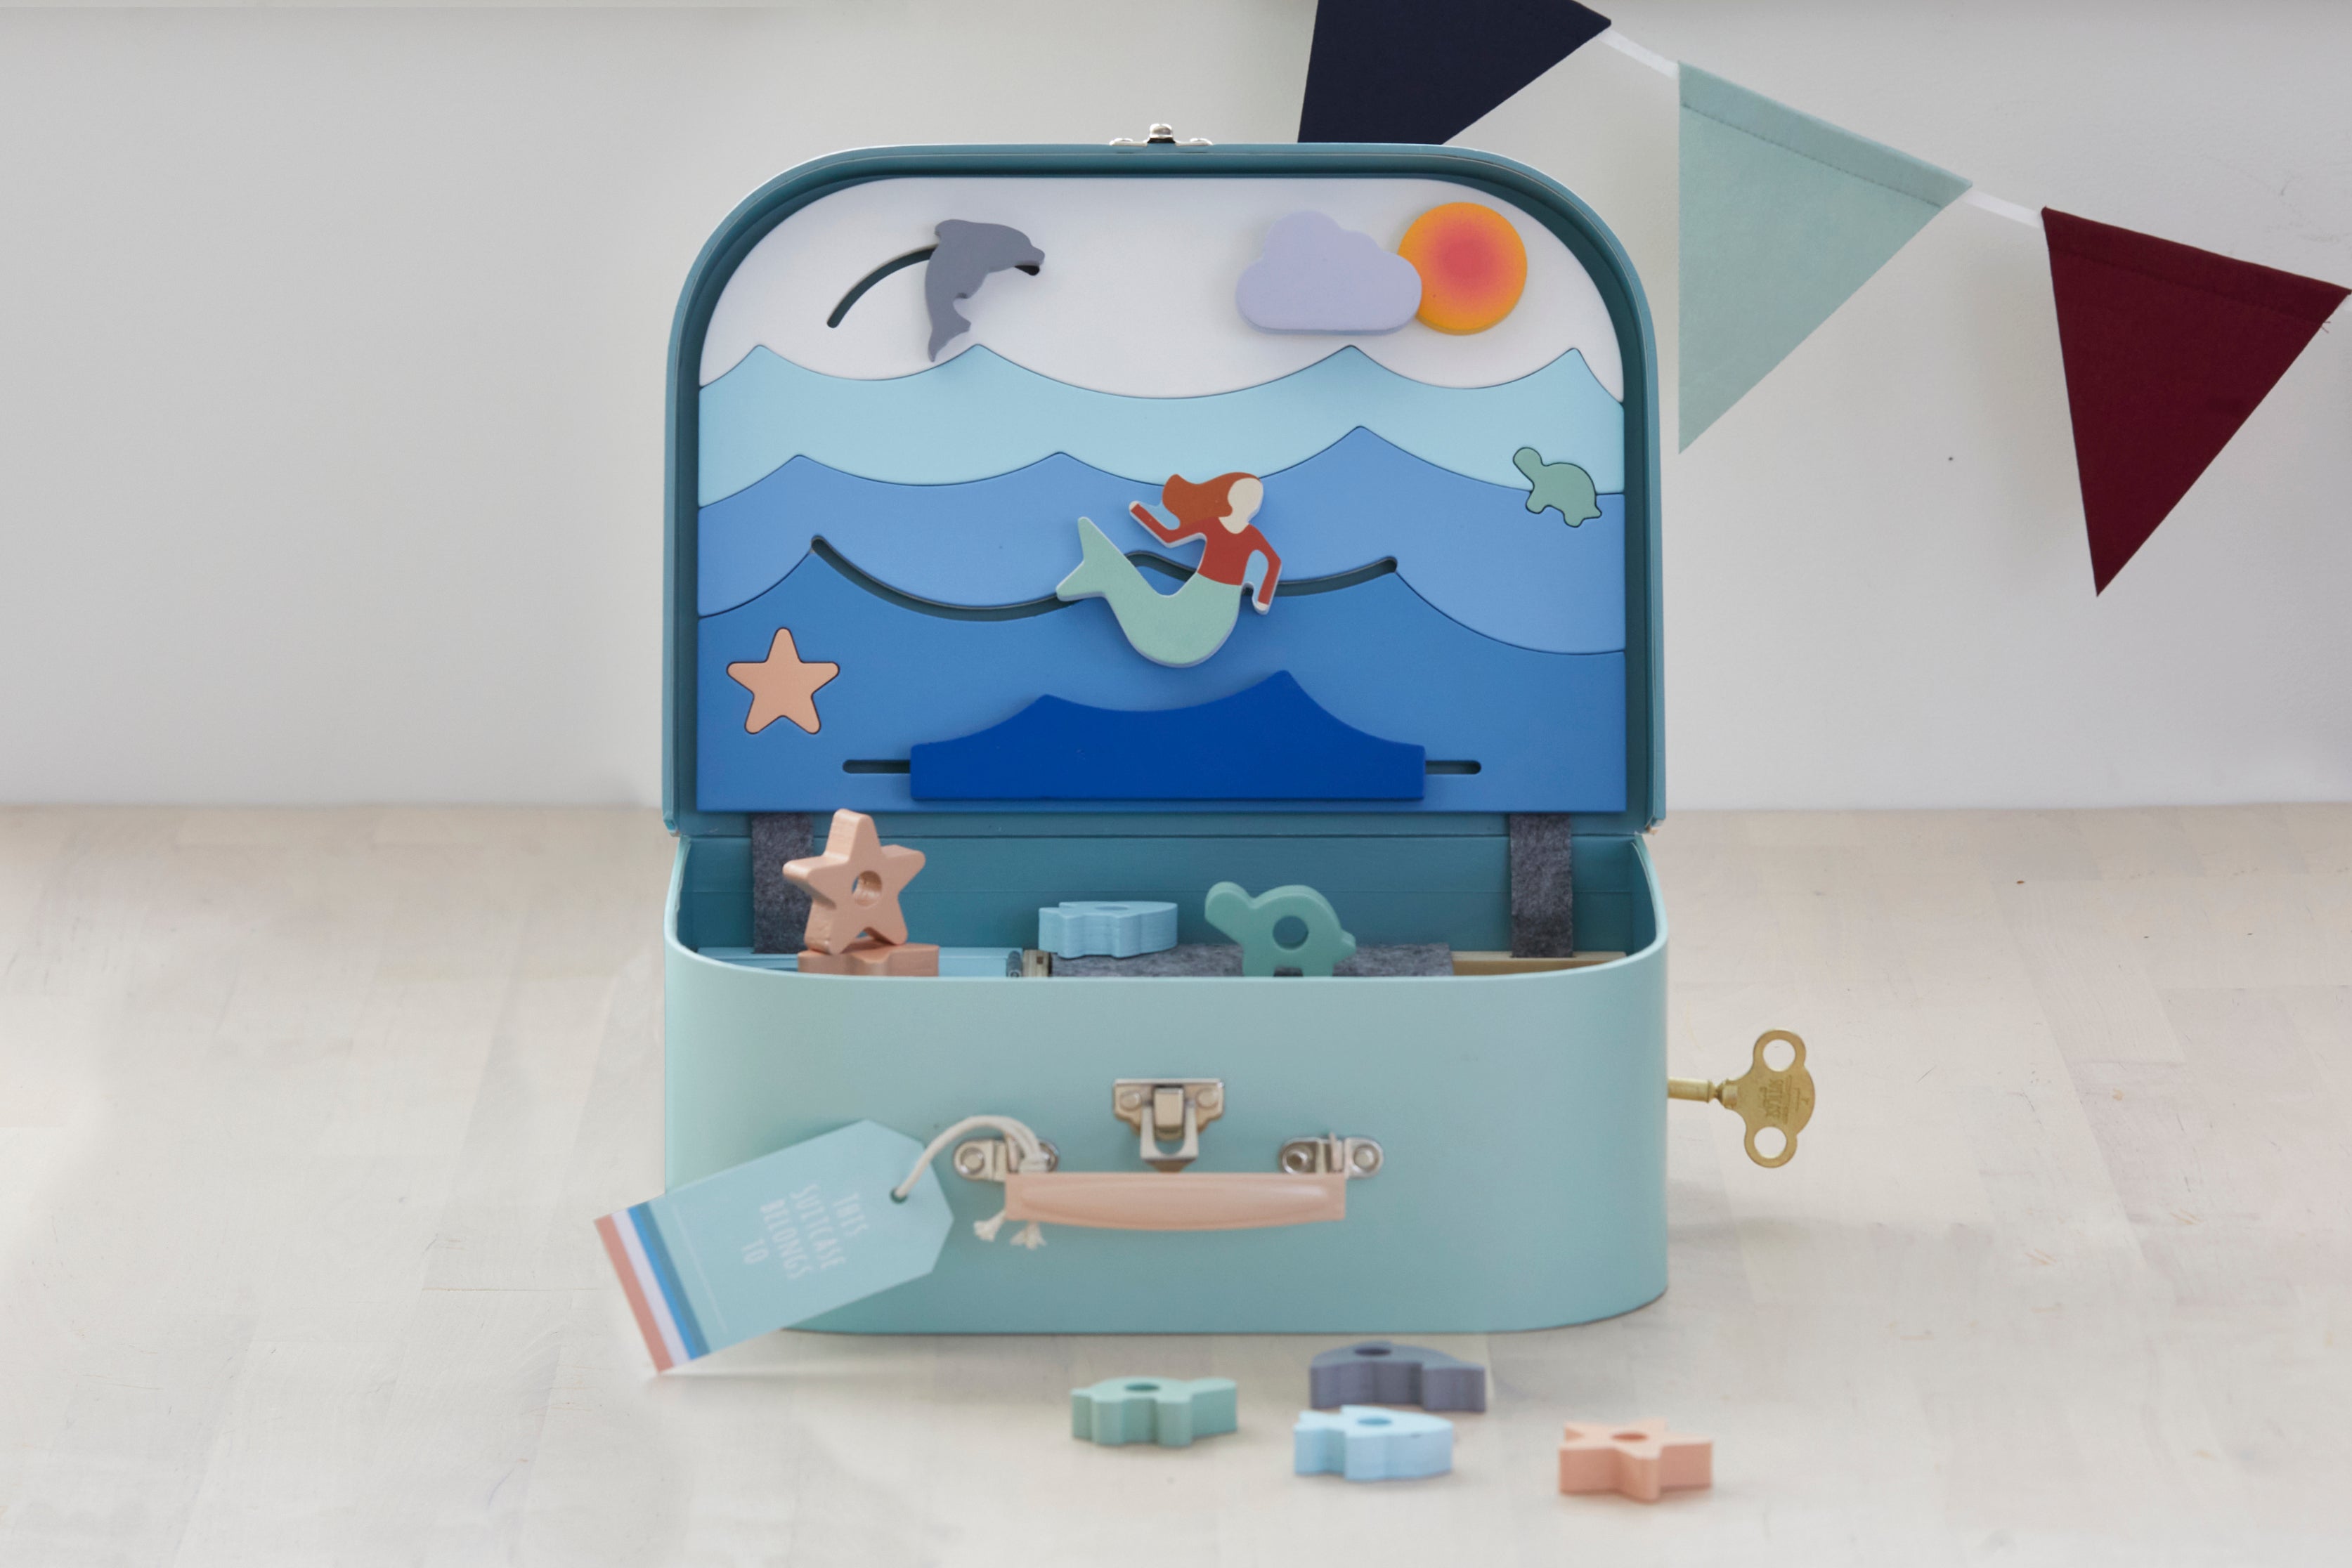 Load video: Children&#39;s educational ocean lover toy suitcase. Includes 1 treasure key, 16 wooden sea shapes, stickers and name tag for customising. Materials: sustainable &amp; recycled materials (FSC timber, recycled felt, cardboard). Original, educational and ethically produced. Supporting cognitive, fine motor, problem solving skills &amp; imaginative play. Easy to pack and carry around. Suitable for children age 3+ years.  Designed and prototyped in Australia. Environmentally friendly packaging.